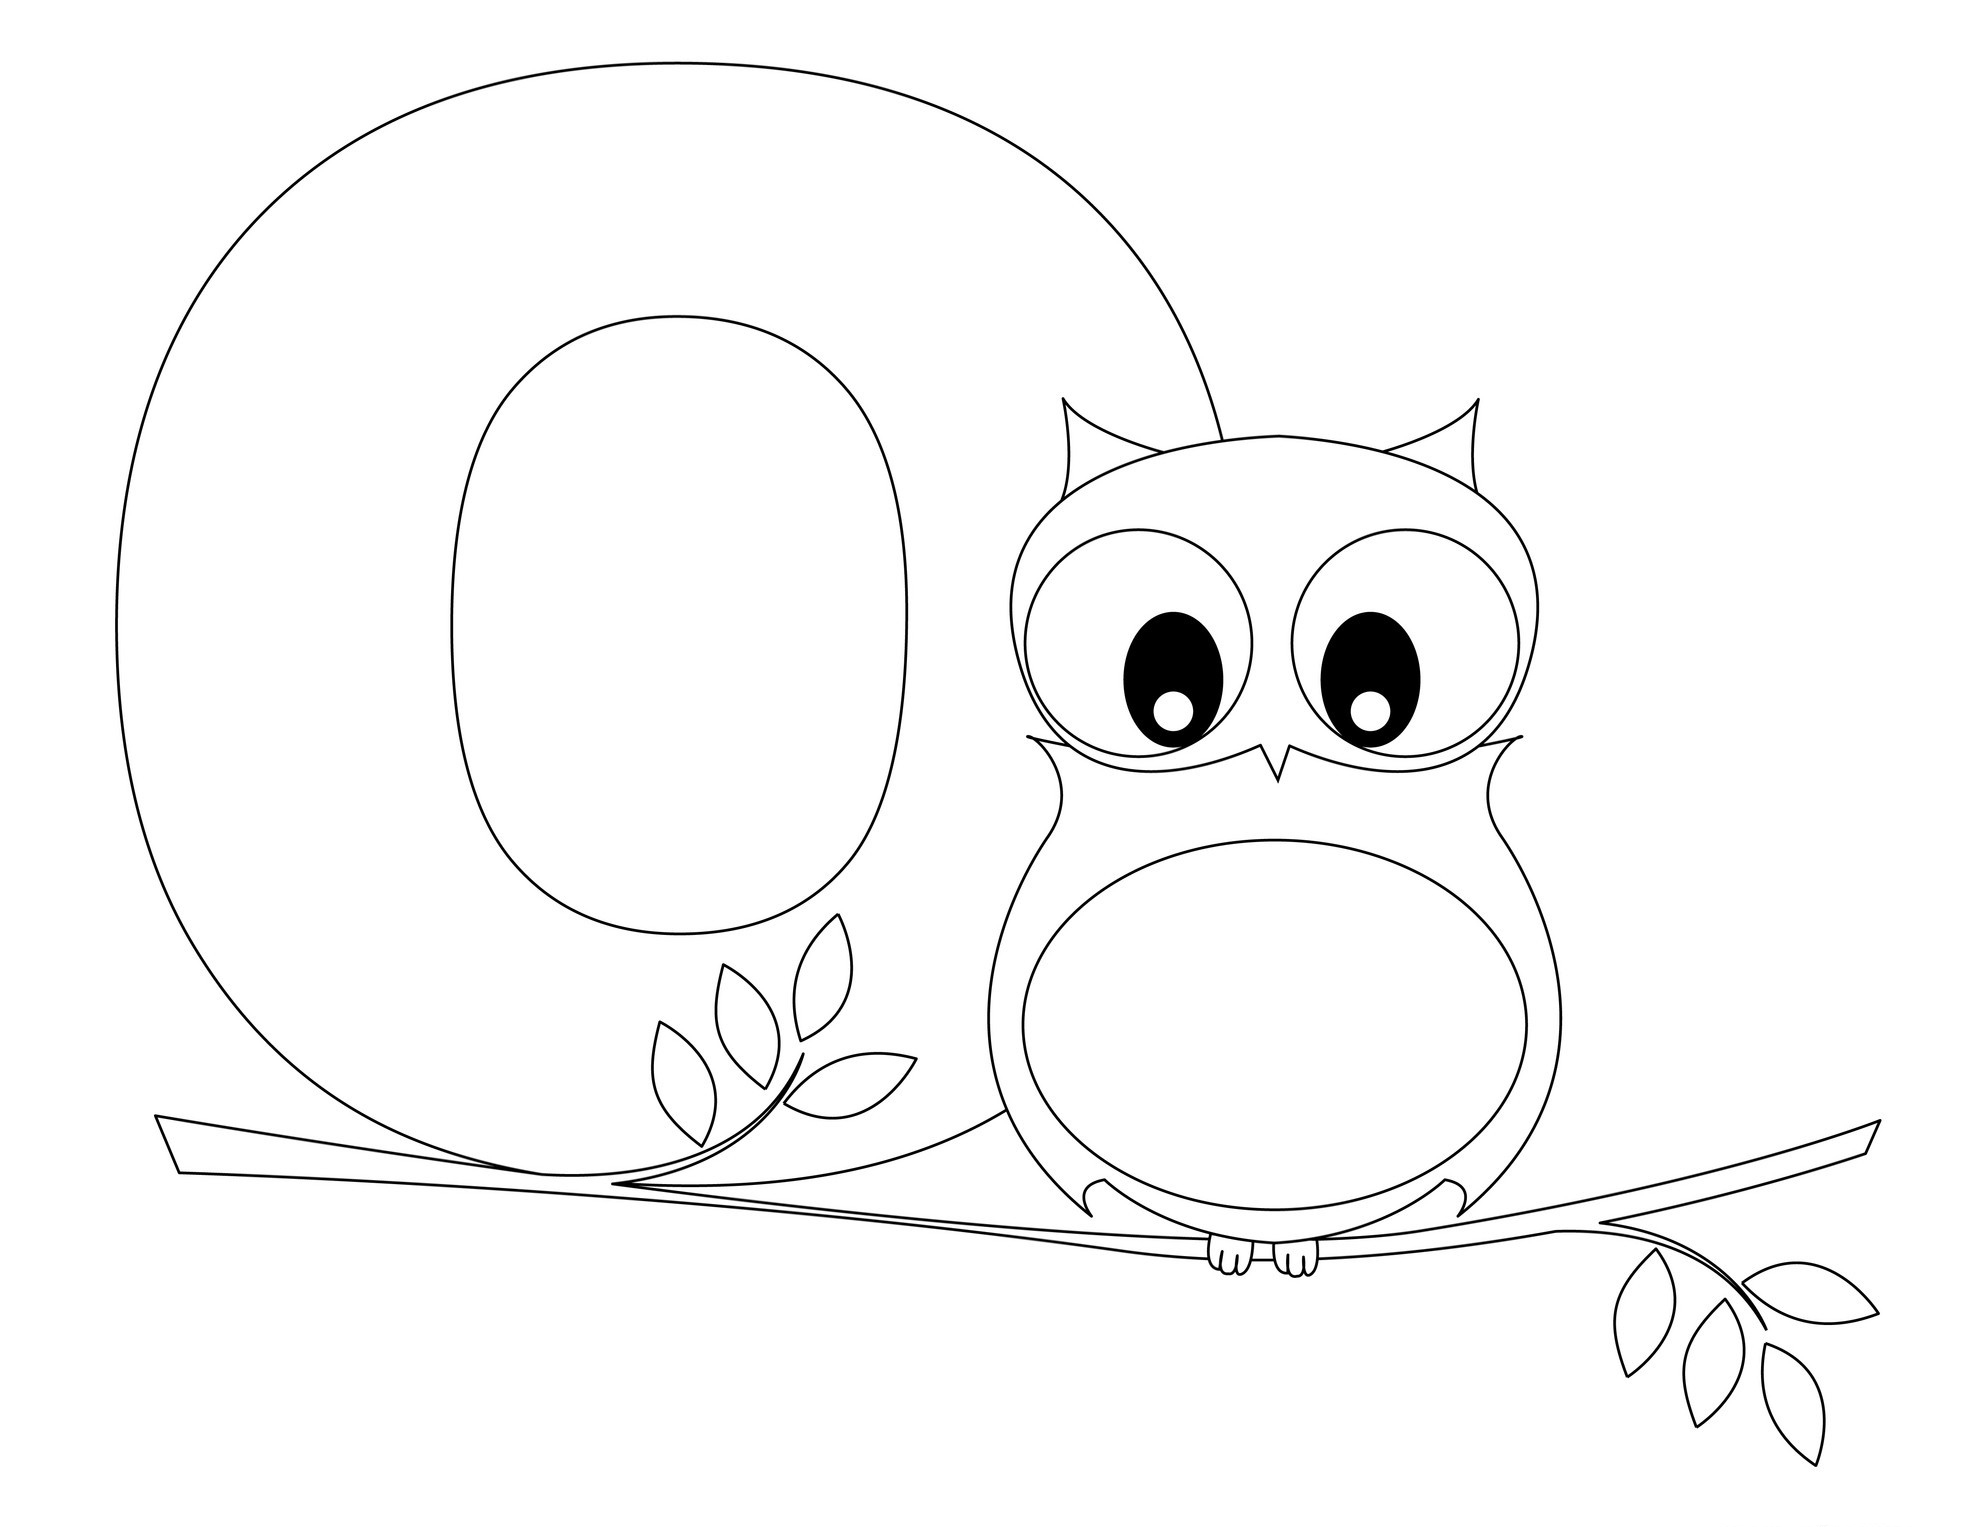 alphabet coloring pages Letter O